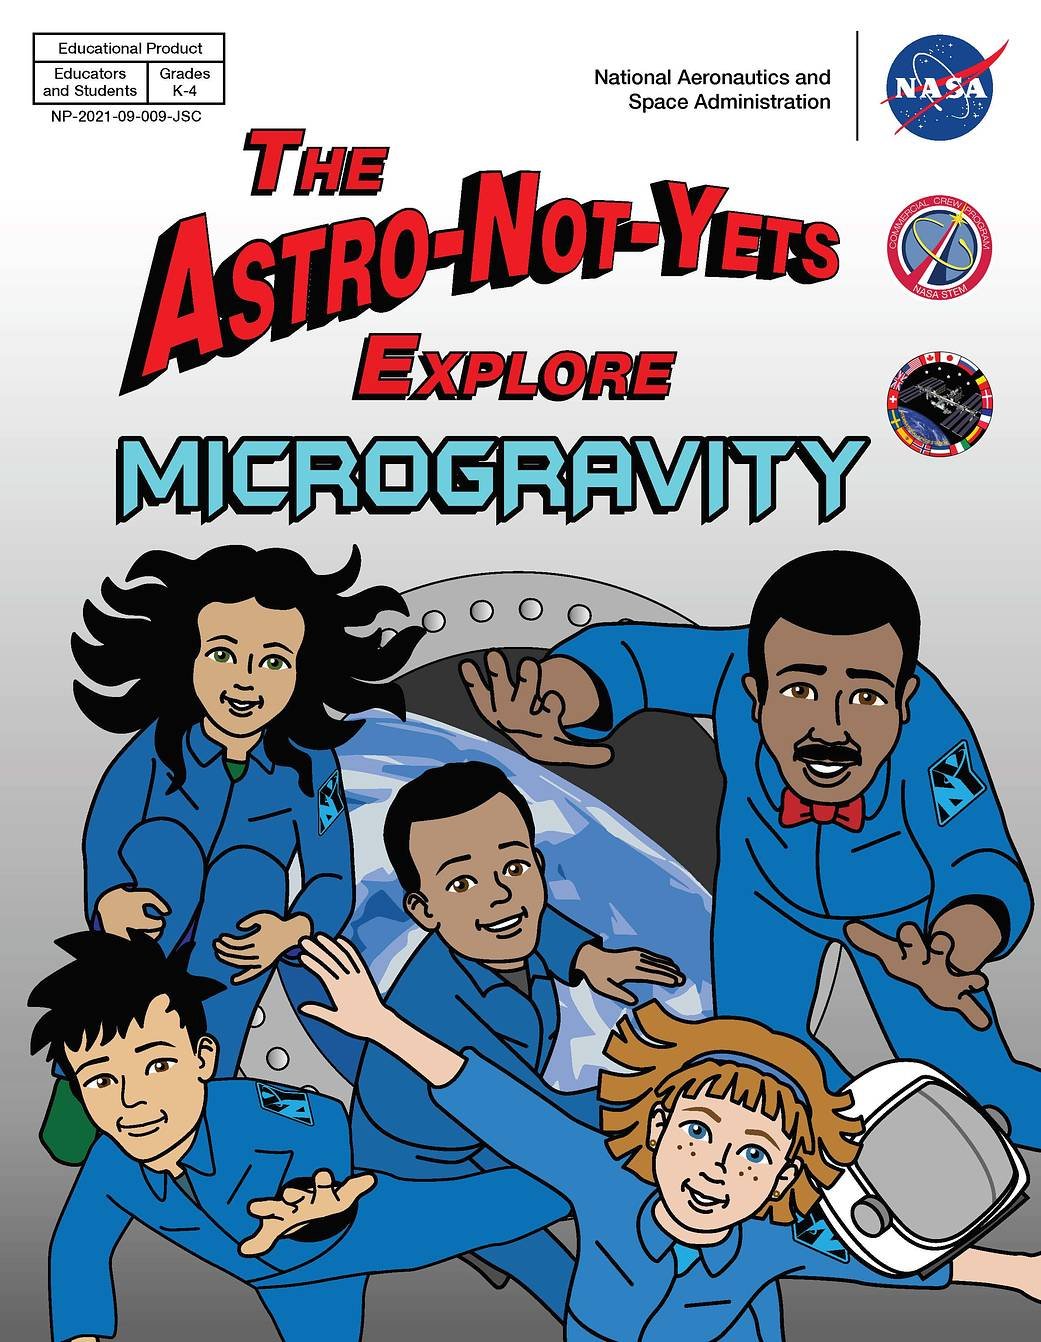 The Astro-Not-Yets: Explore Microgravity